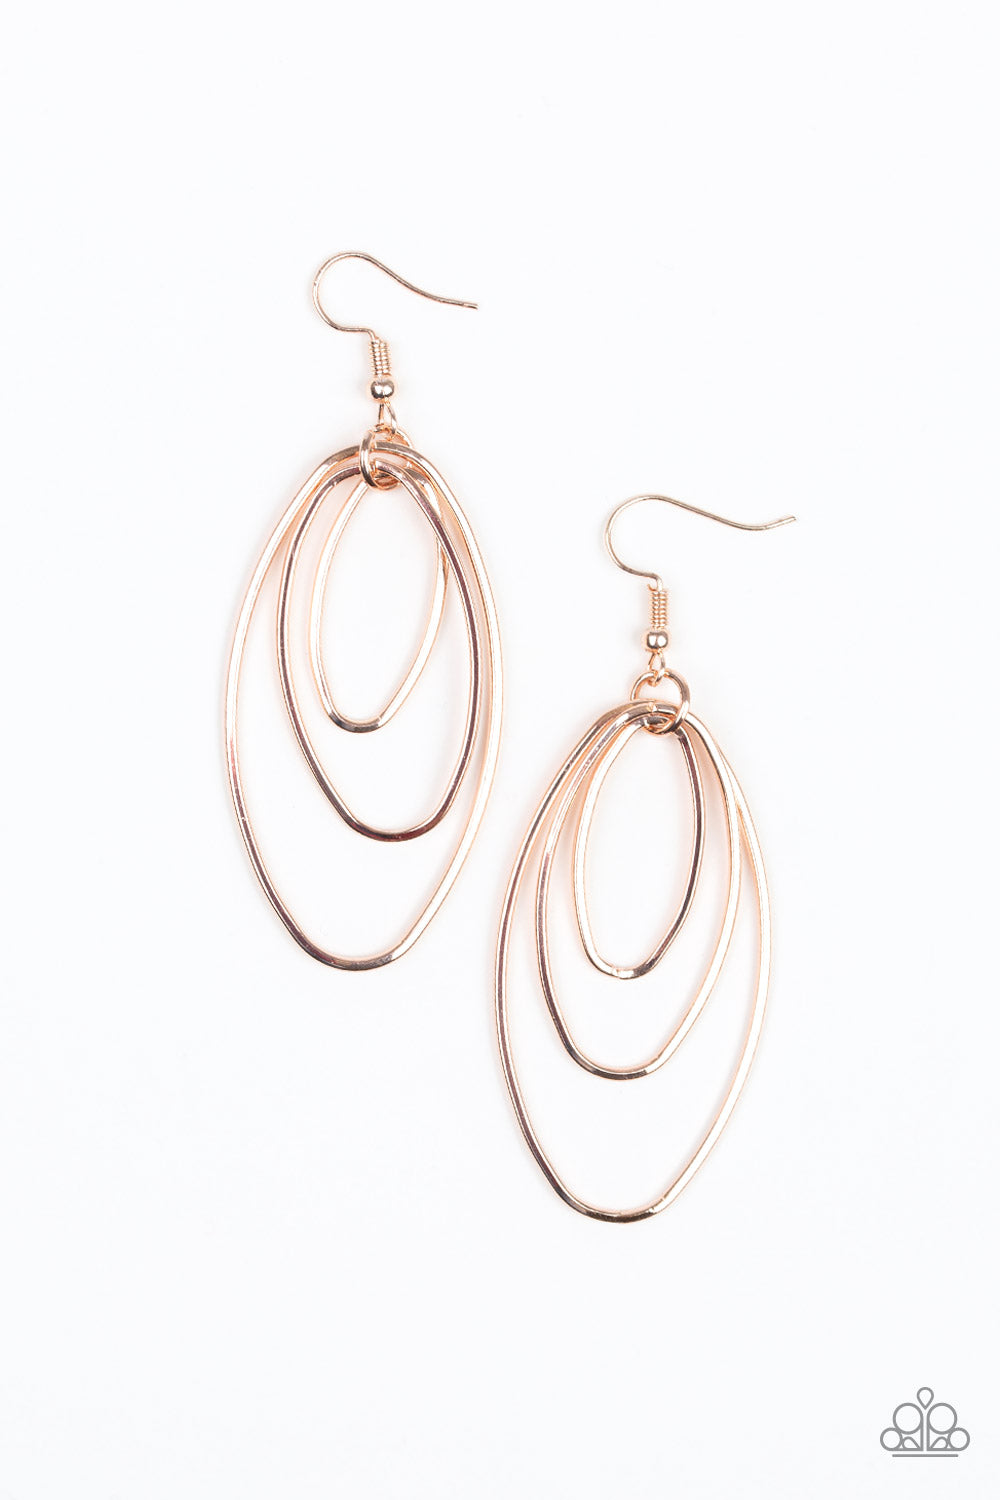 All OVAL The Place Rose Gold Paparazzi Earrings Cashmere Pink Jewels - Cashmere Pink Jewels & Accessories, Cashmere Pink Jewels & Accessories - Paparazzi